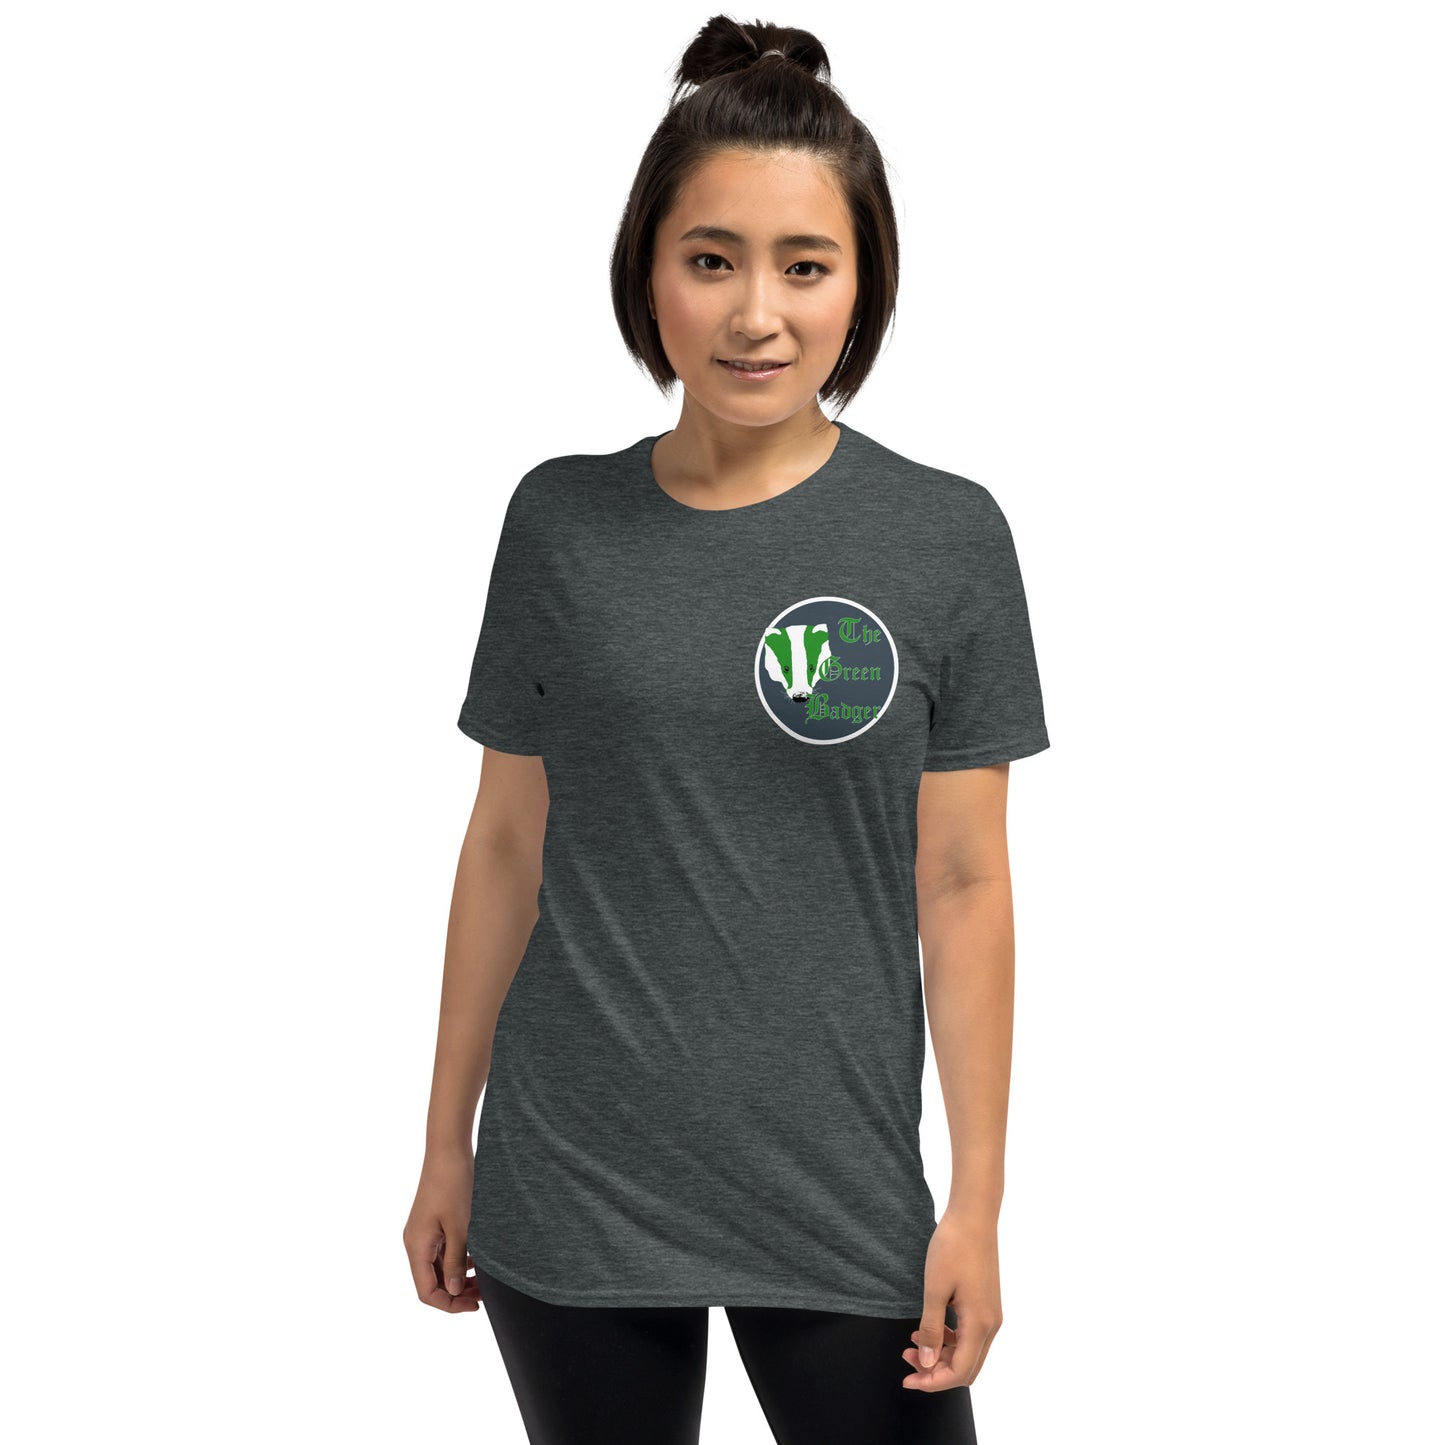 The Green Badger front and back Short-Sleeve Unisex T-Shirt